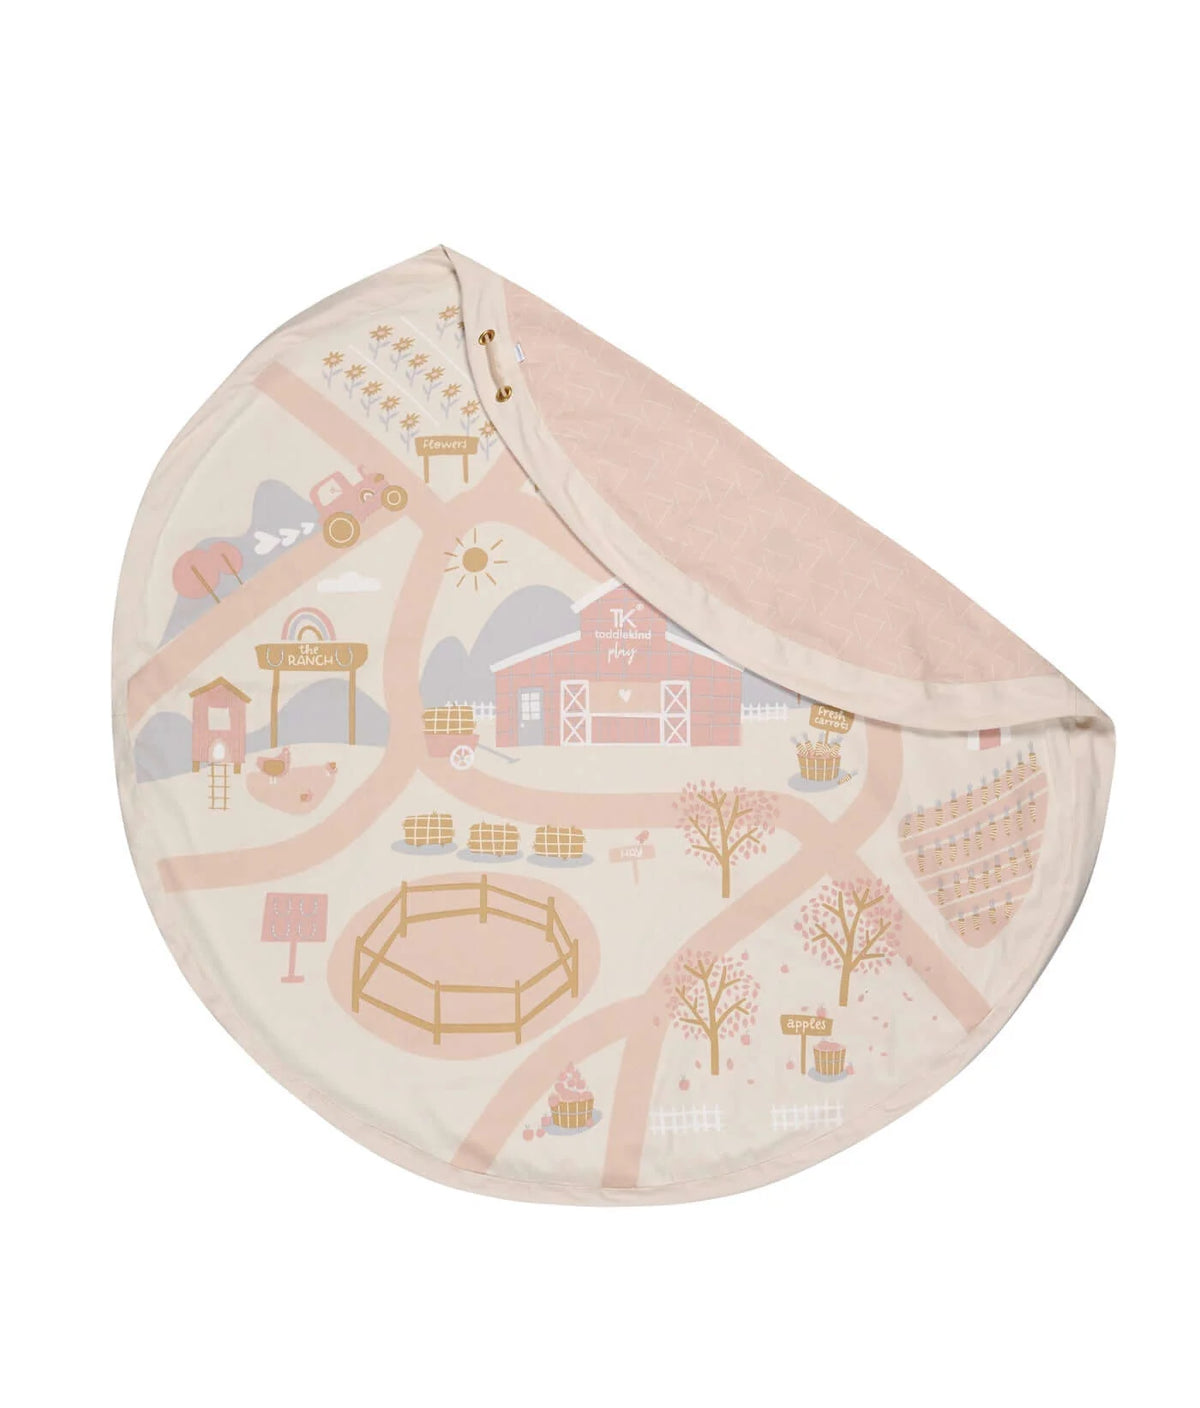 2-in-1 Playmat + Toy Bag  The Ranch